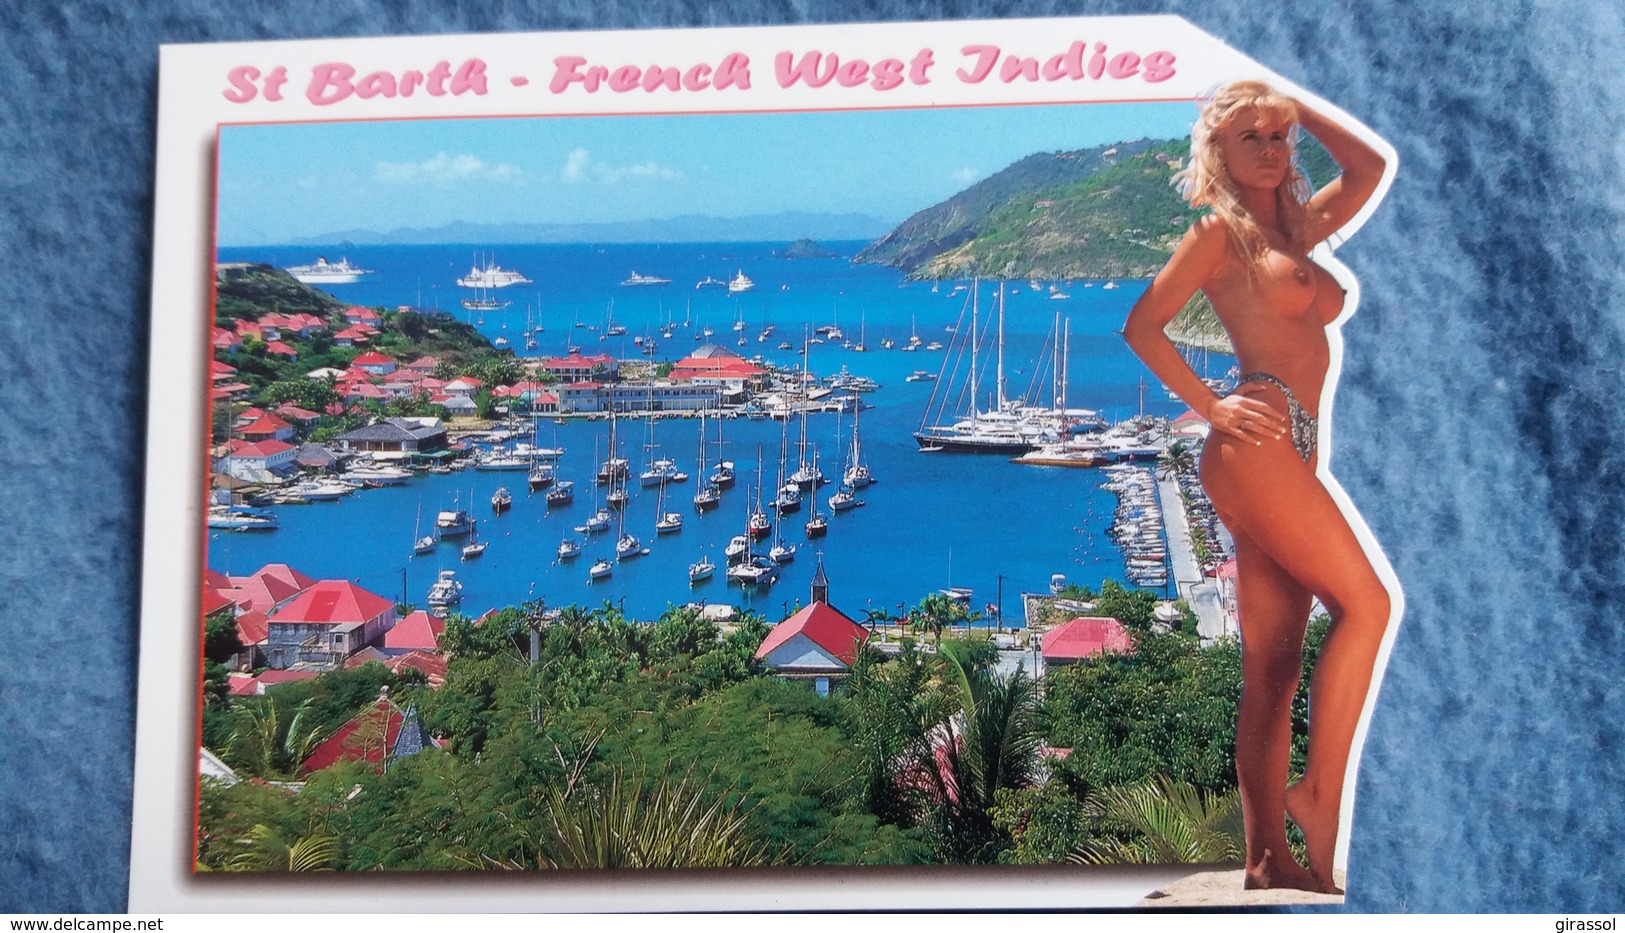 CPM PIN UP FEMME AUX SEINS NUS NU ST BARTH BARTHELEMY FRENCH WEST INDIES PHOTO P ROUX ED AS - Pin-Ups